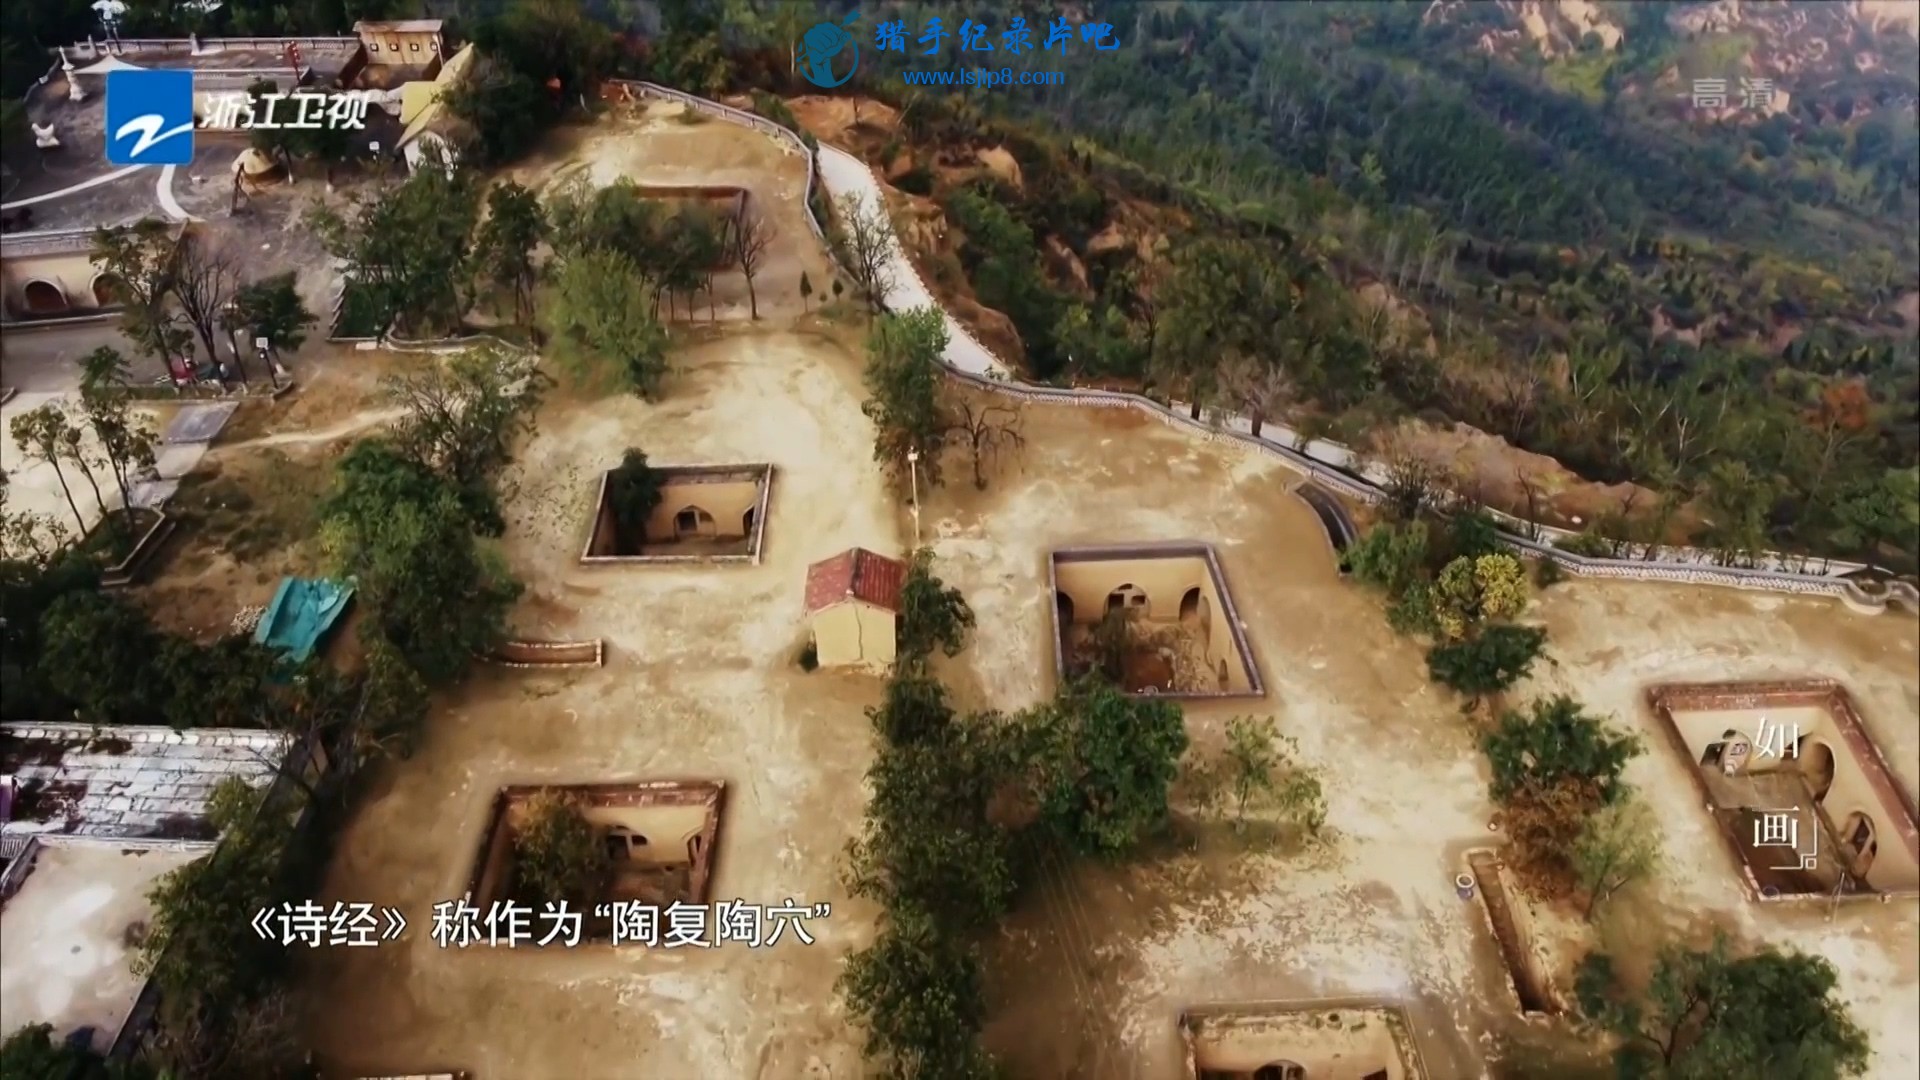 ZJTV-HD,Villages.in.China.EP01.HDTV.1080i.H264.AAC.ts_20190920_082349.754.jpg